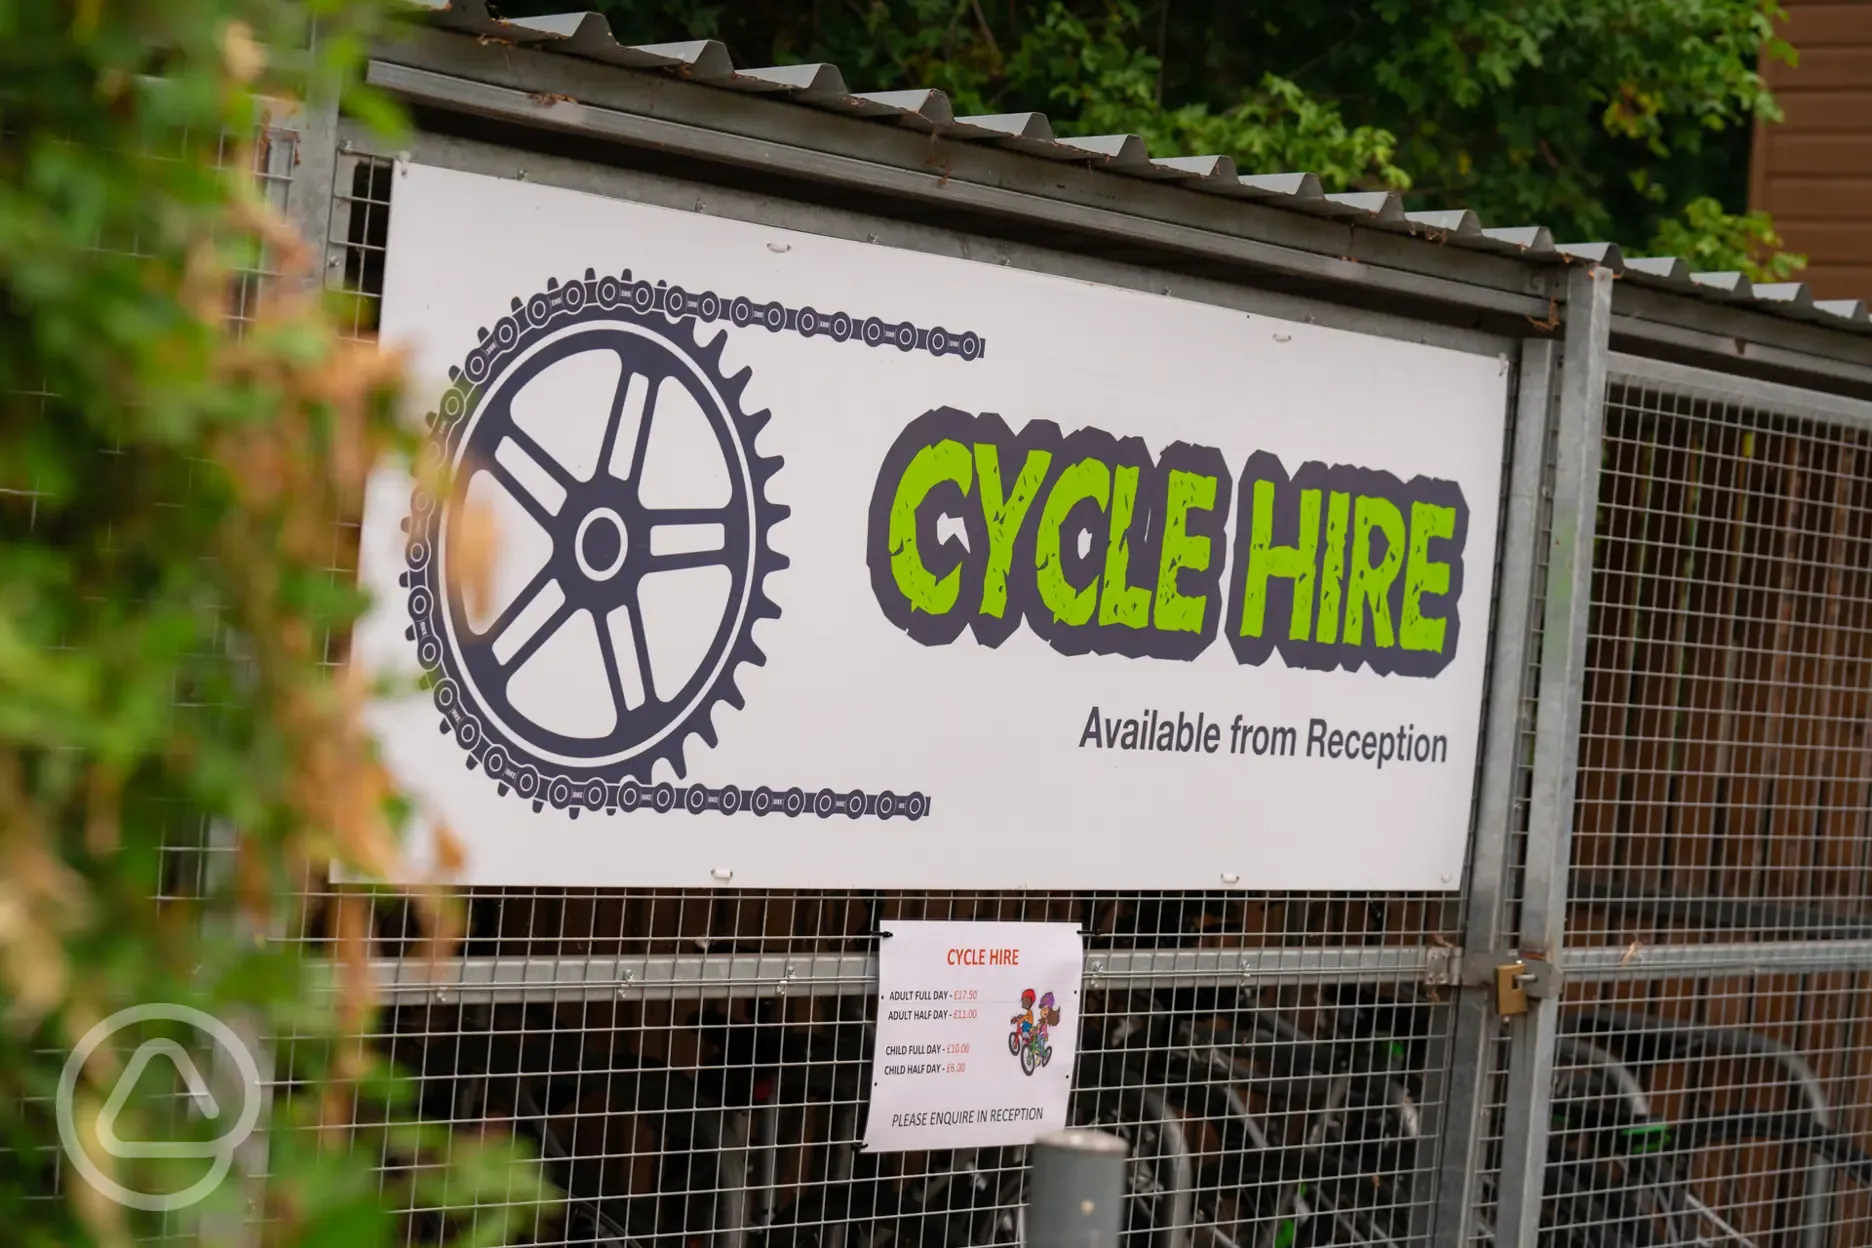 Cycle hire